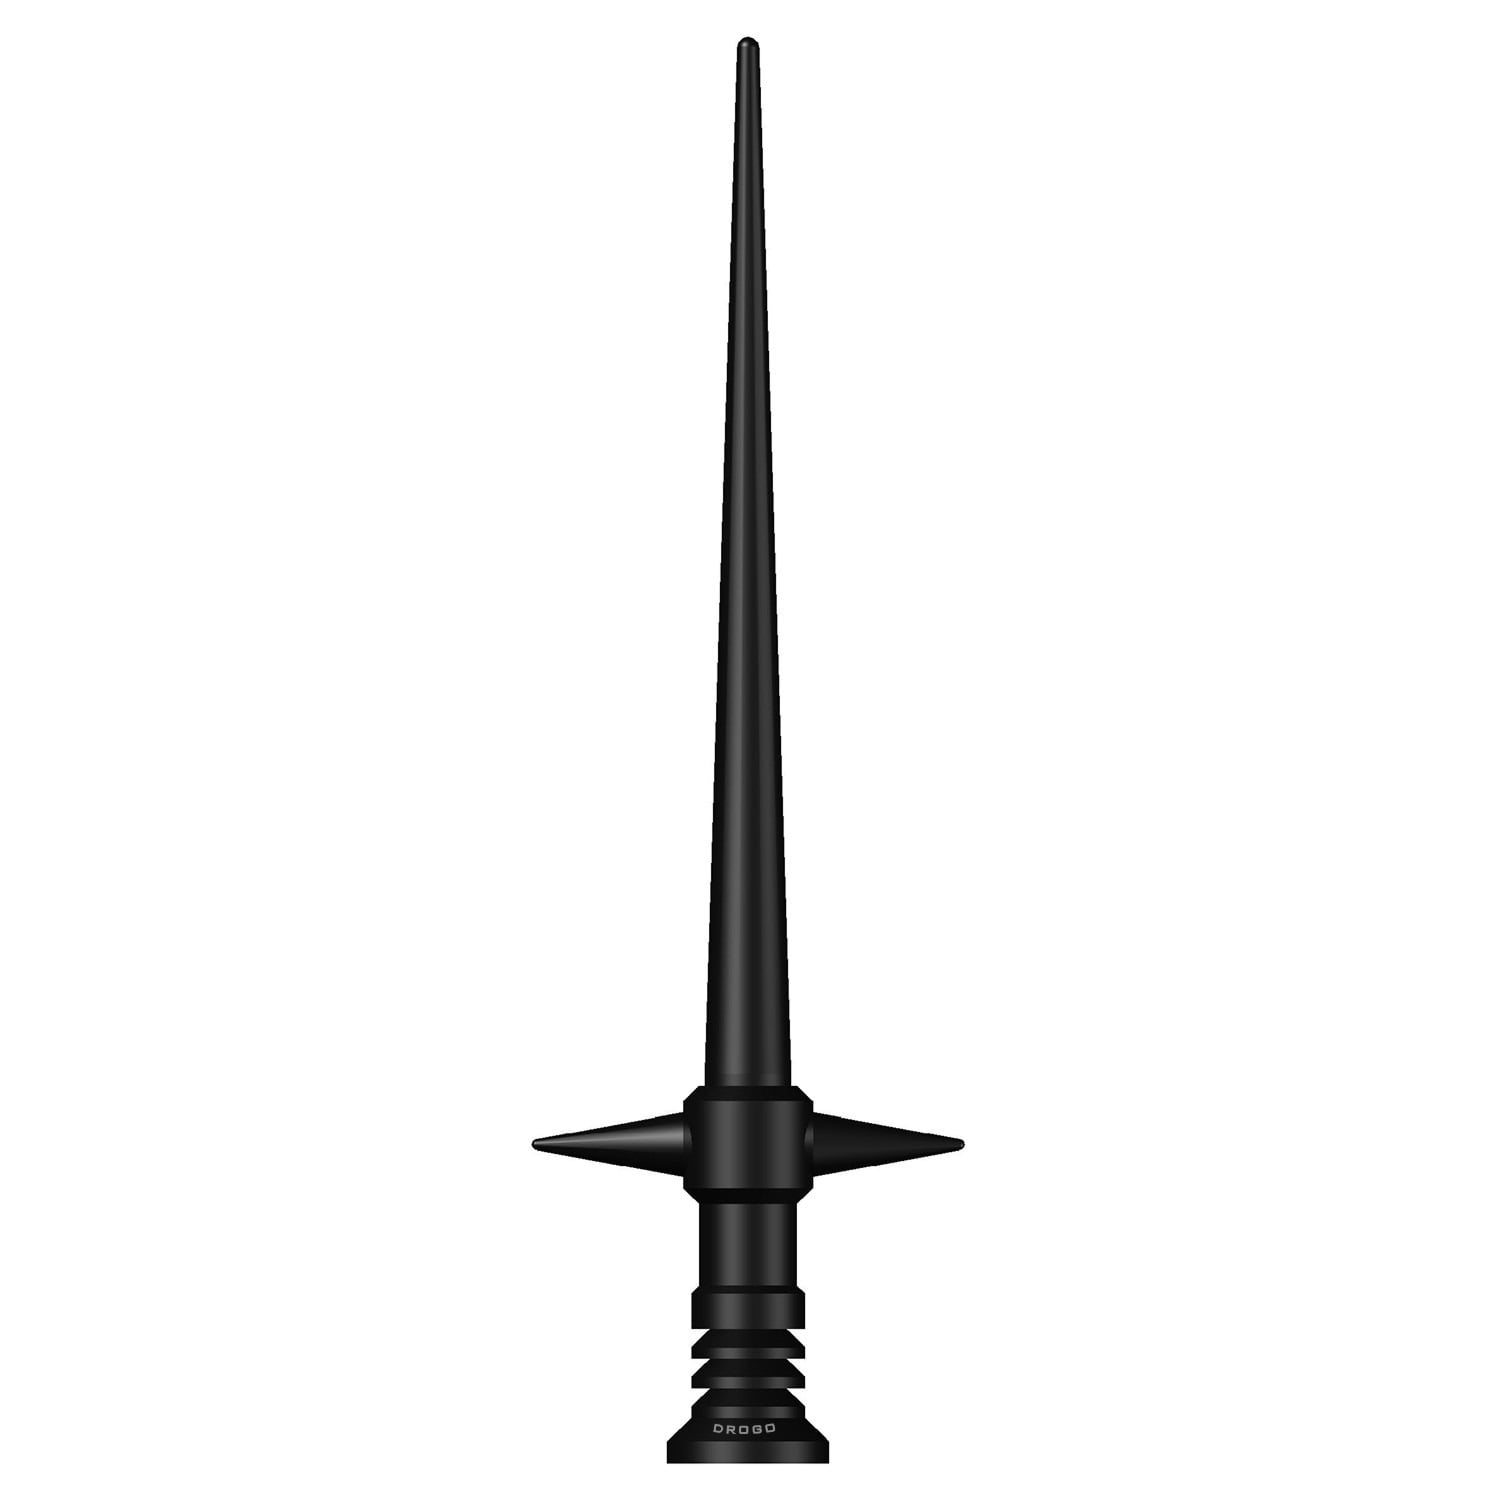 DROGO 1.5" Tougher Replacement Antenna for Jeep Patriot 2007-2017 Stealth Black